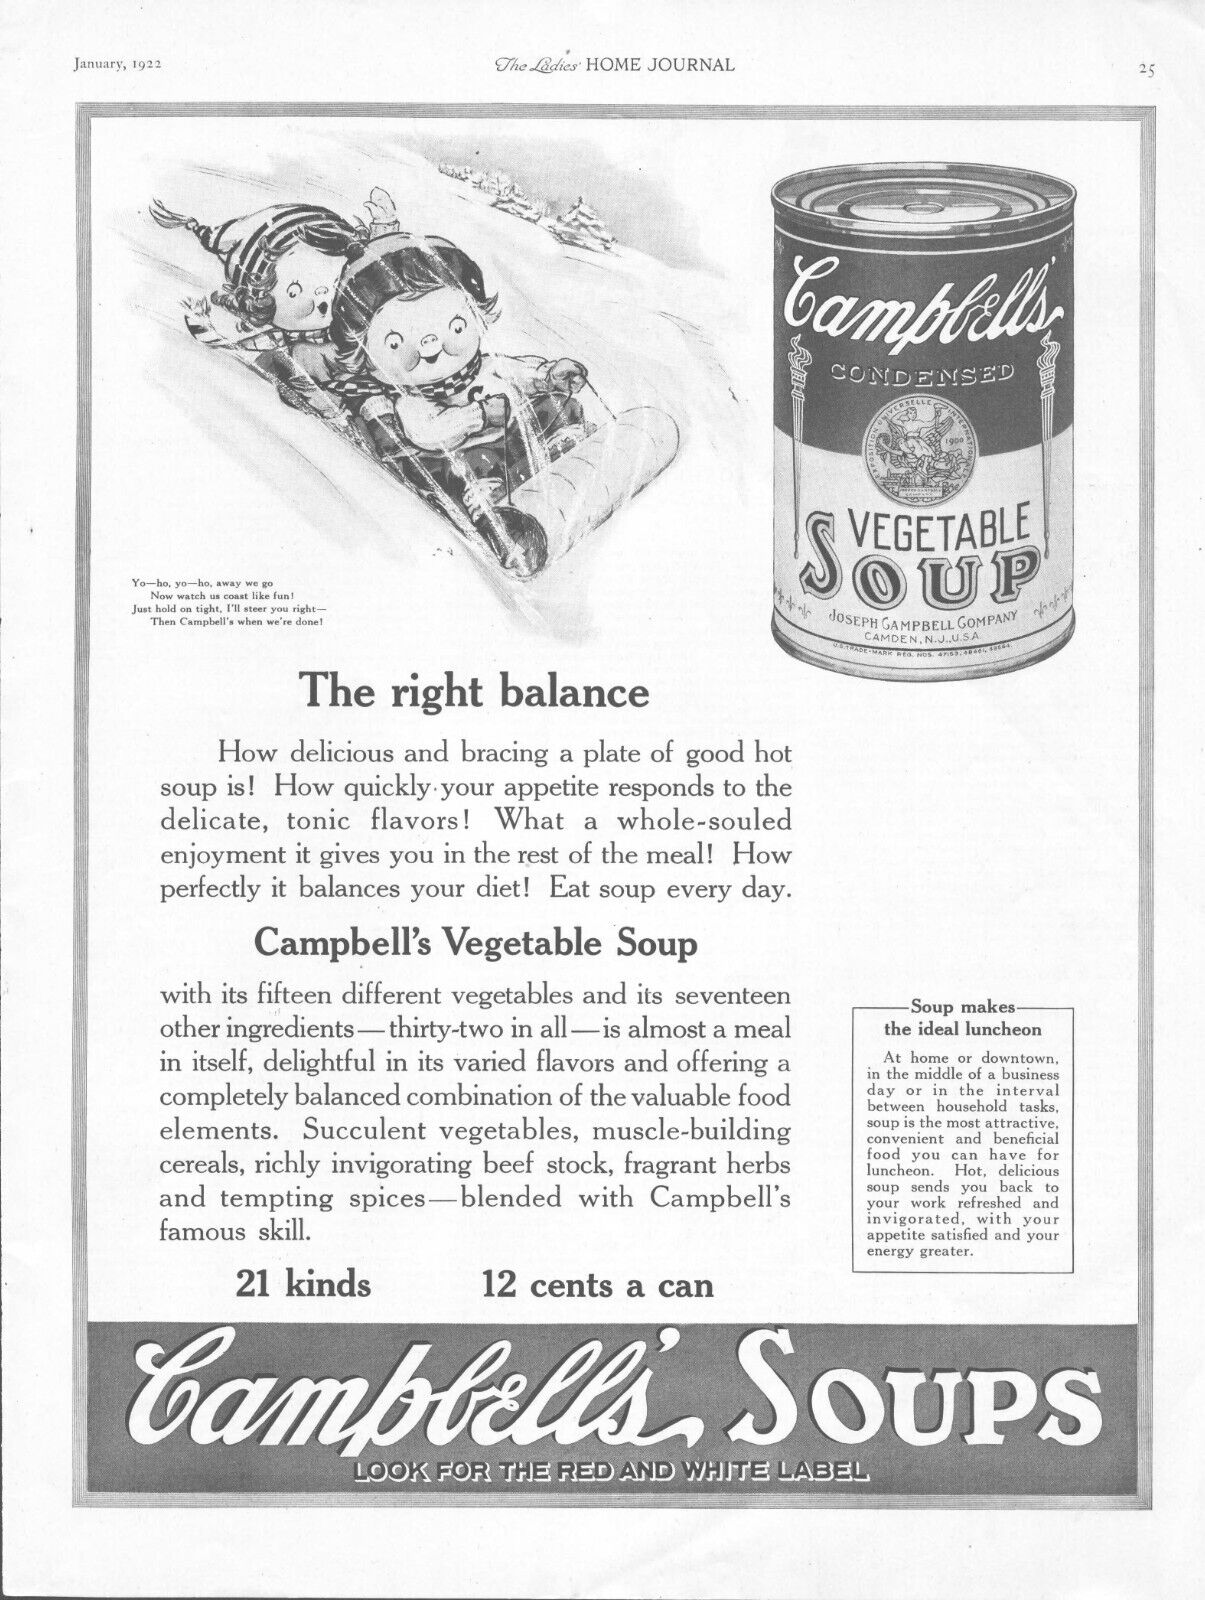 1922 Campbells Vegetable Soup Antique Print Ad Sleigh Riding The Right Balance